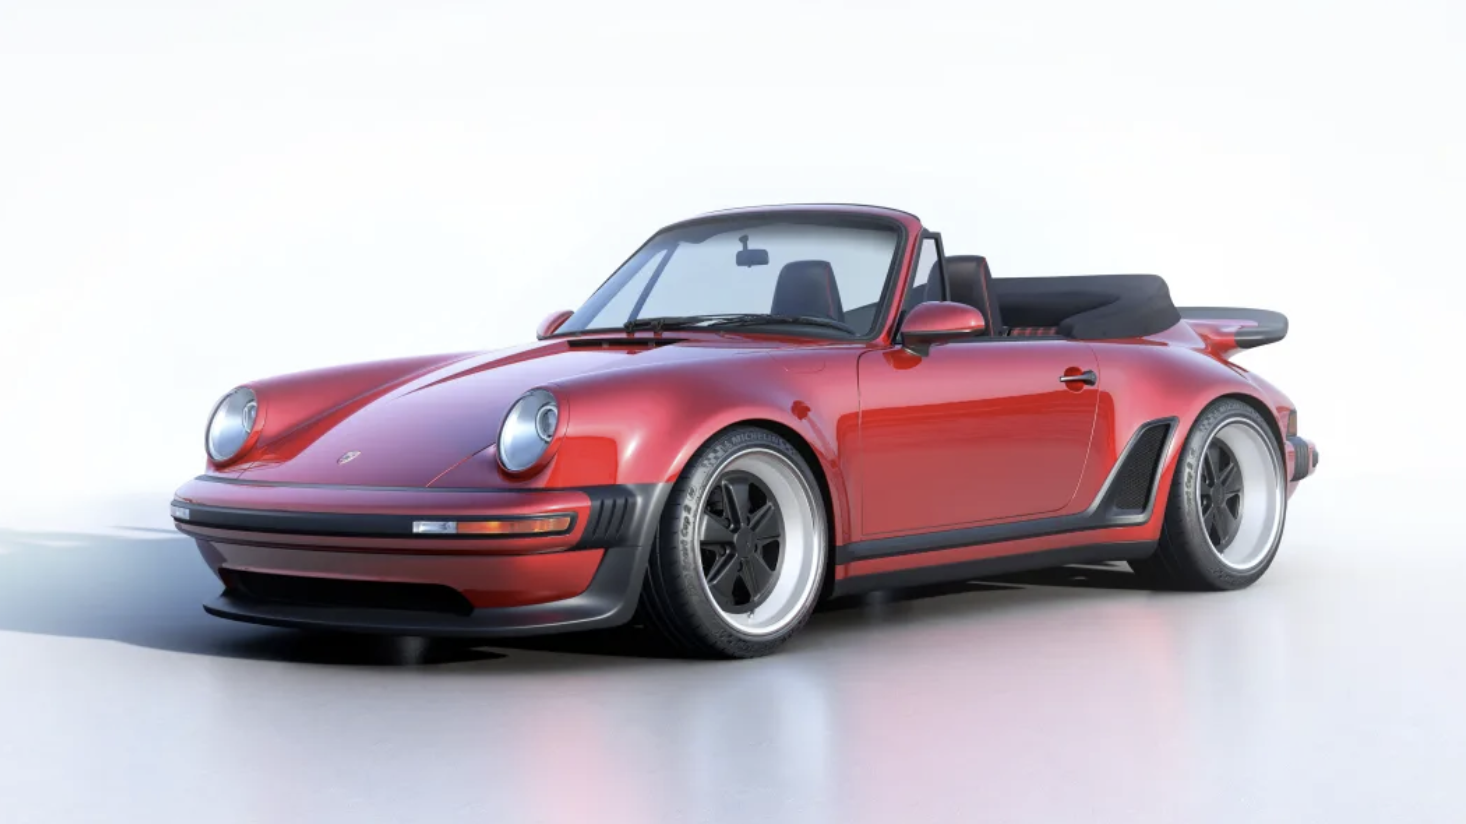 You can finally drop the top on your Singer-reimagined Porsche